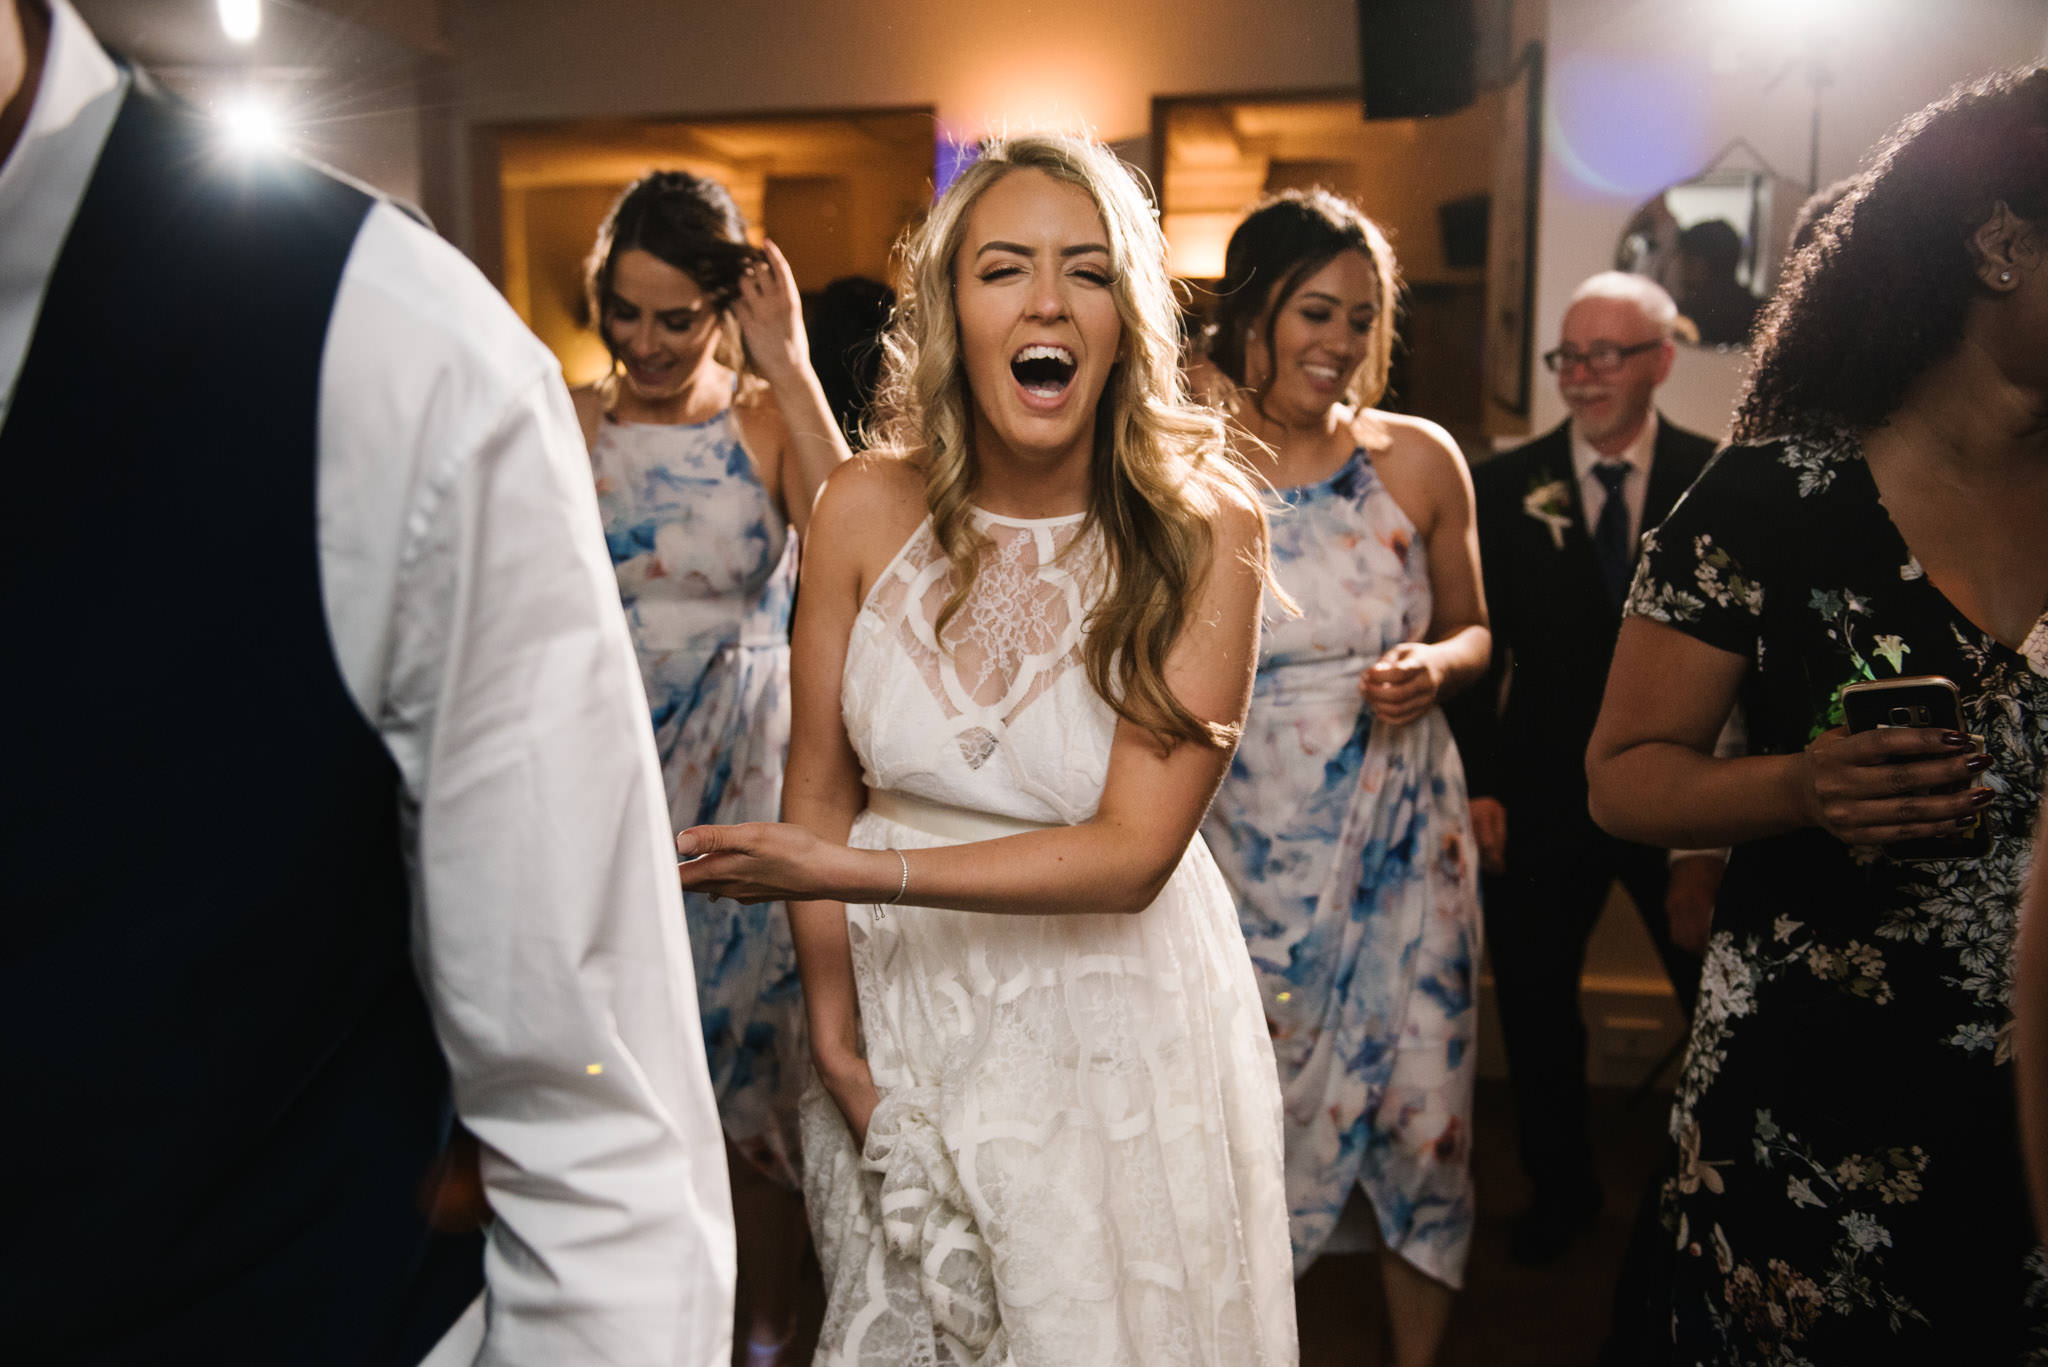 Bride laughing during line dance at wedding reception